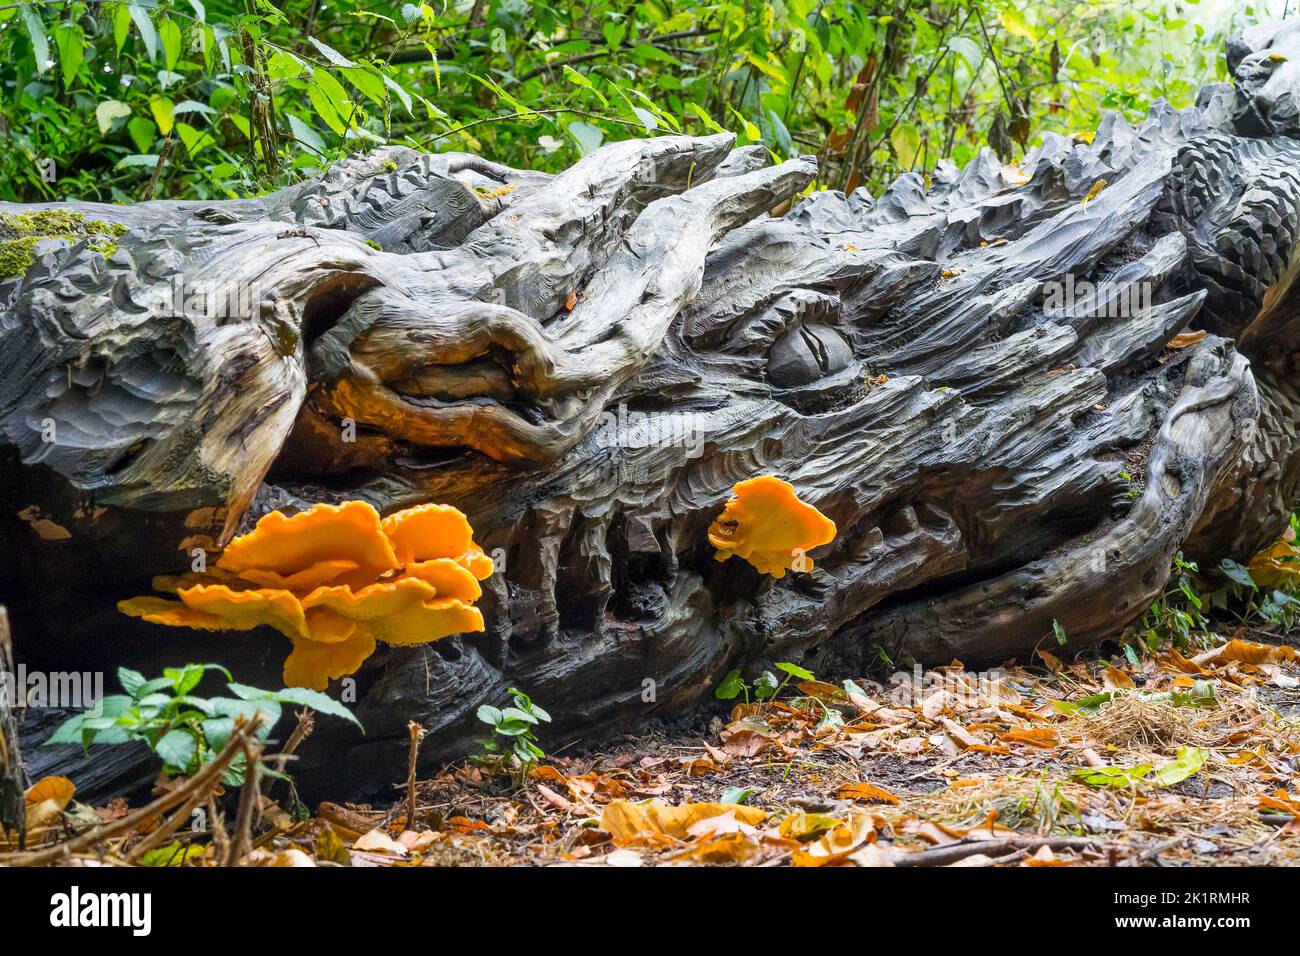 Fire breathing dragon. Wood dragon head carving with fire-like orange fungi growing from its mouth. Stock Photo